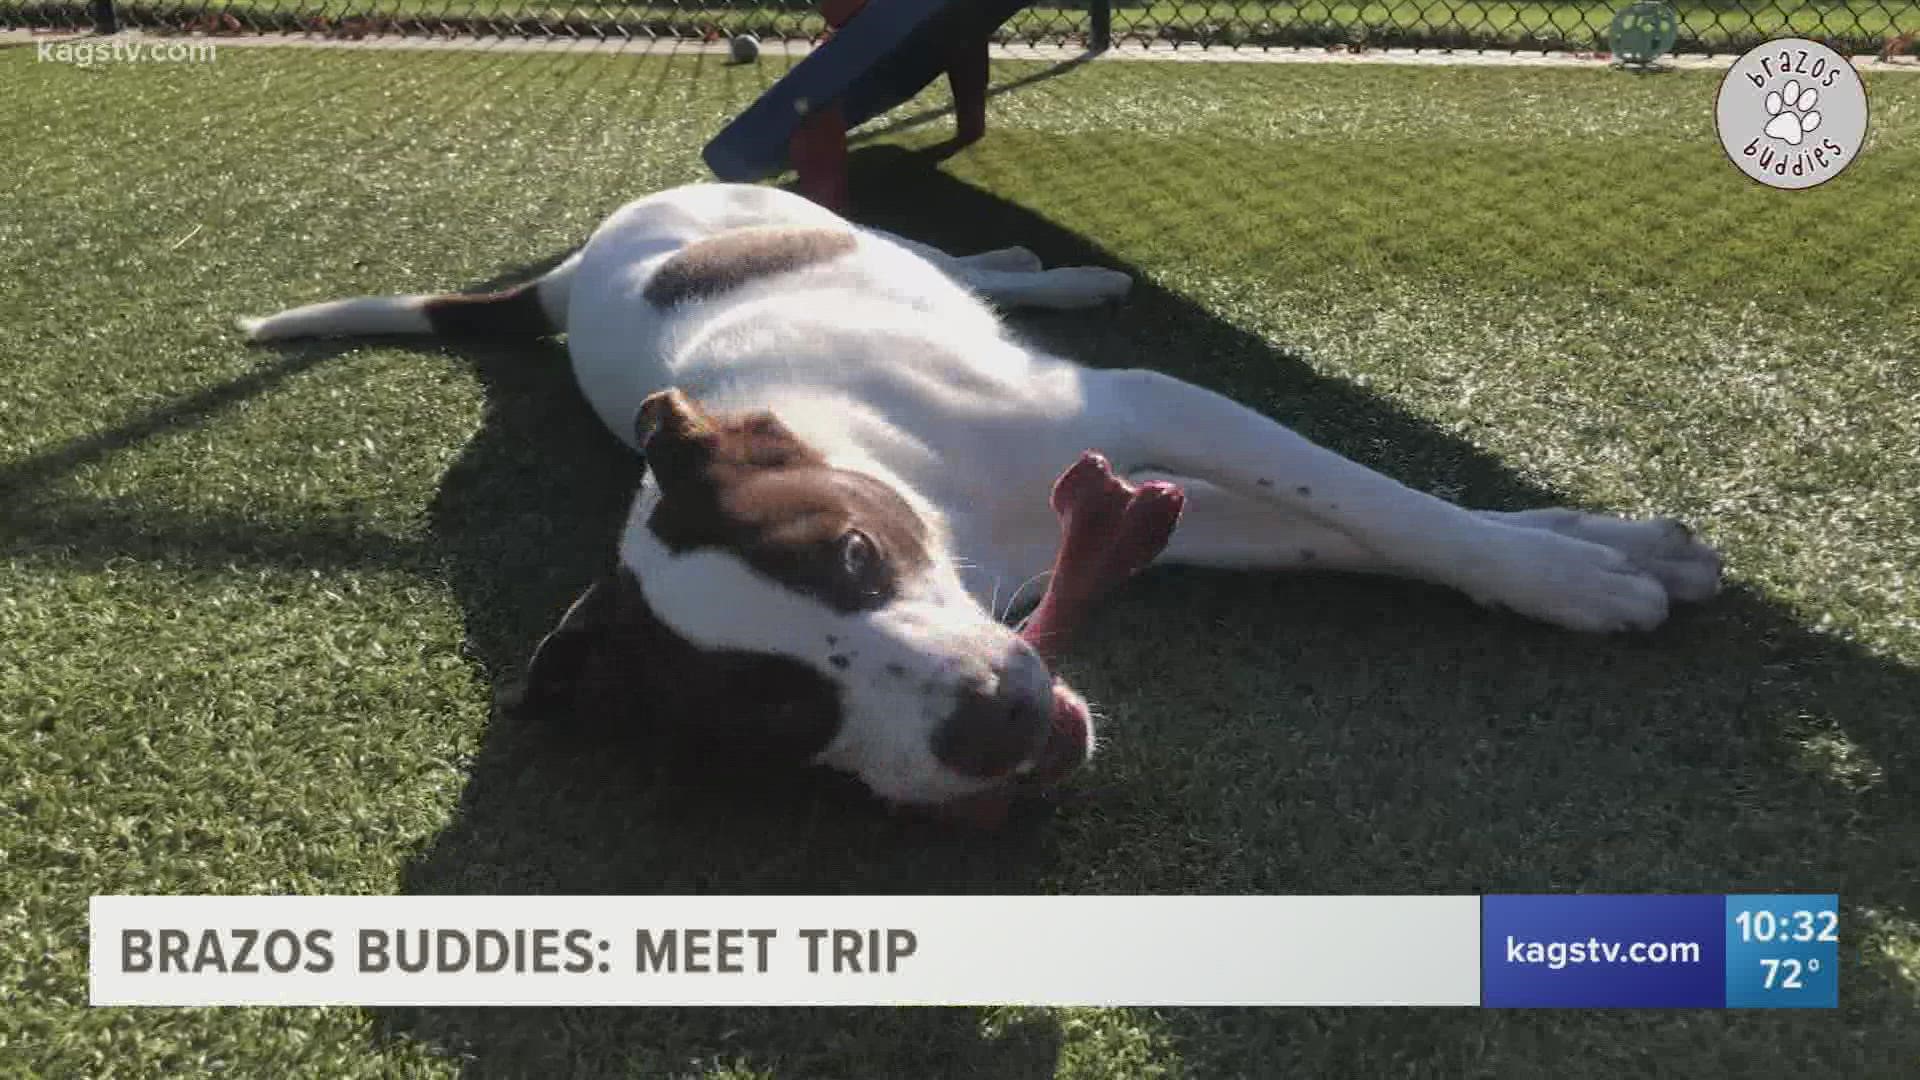 This seven-month-old hound mix is located at the Bryan Animal Center and needs a forever home.